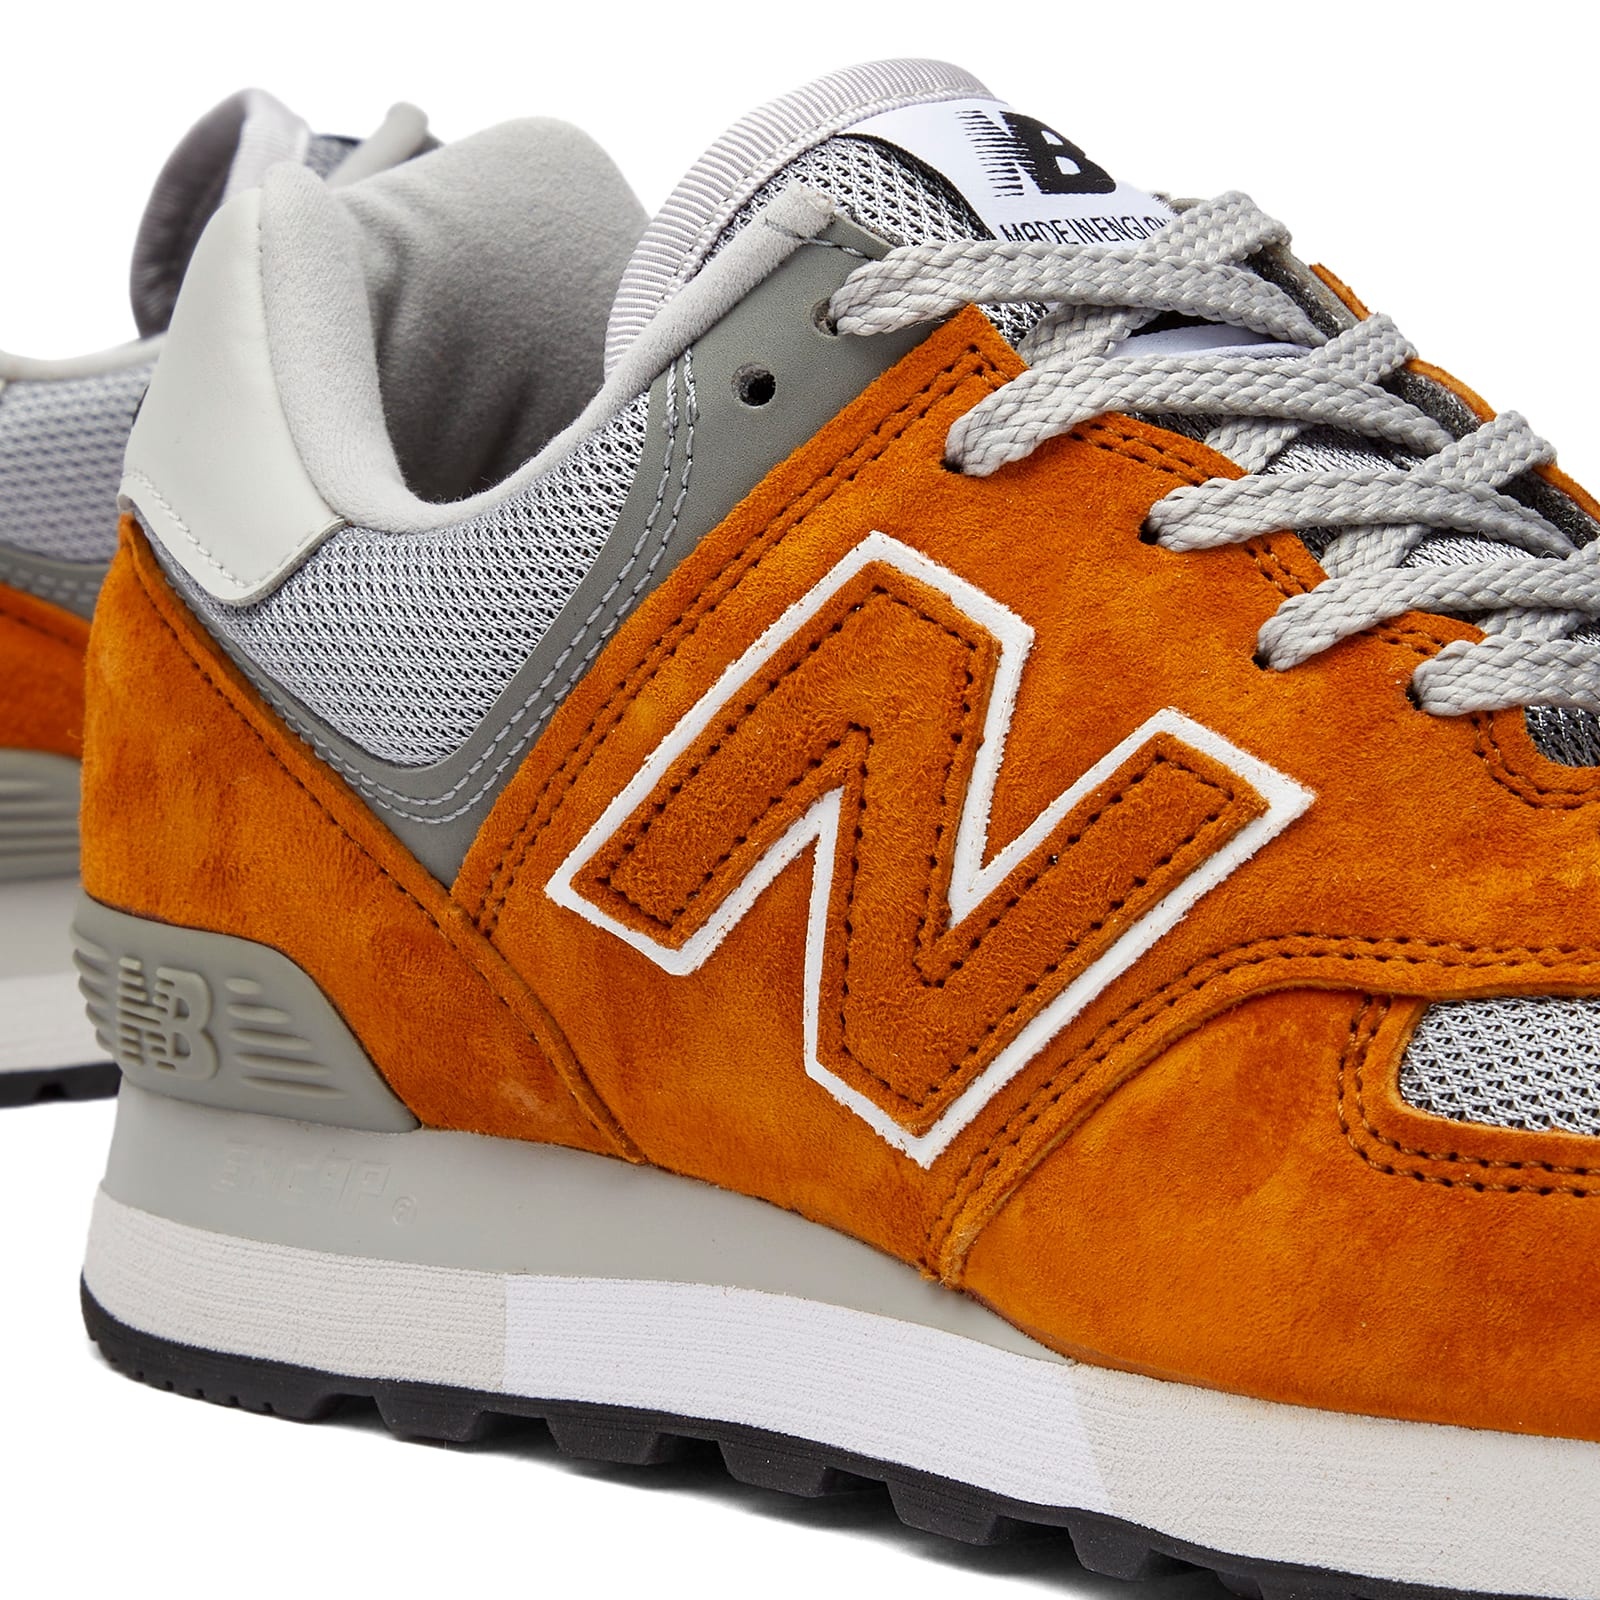 New Balance OU576OOK - Made in UK - 4